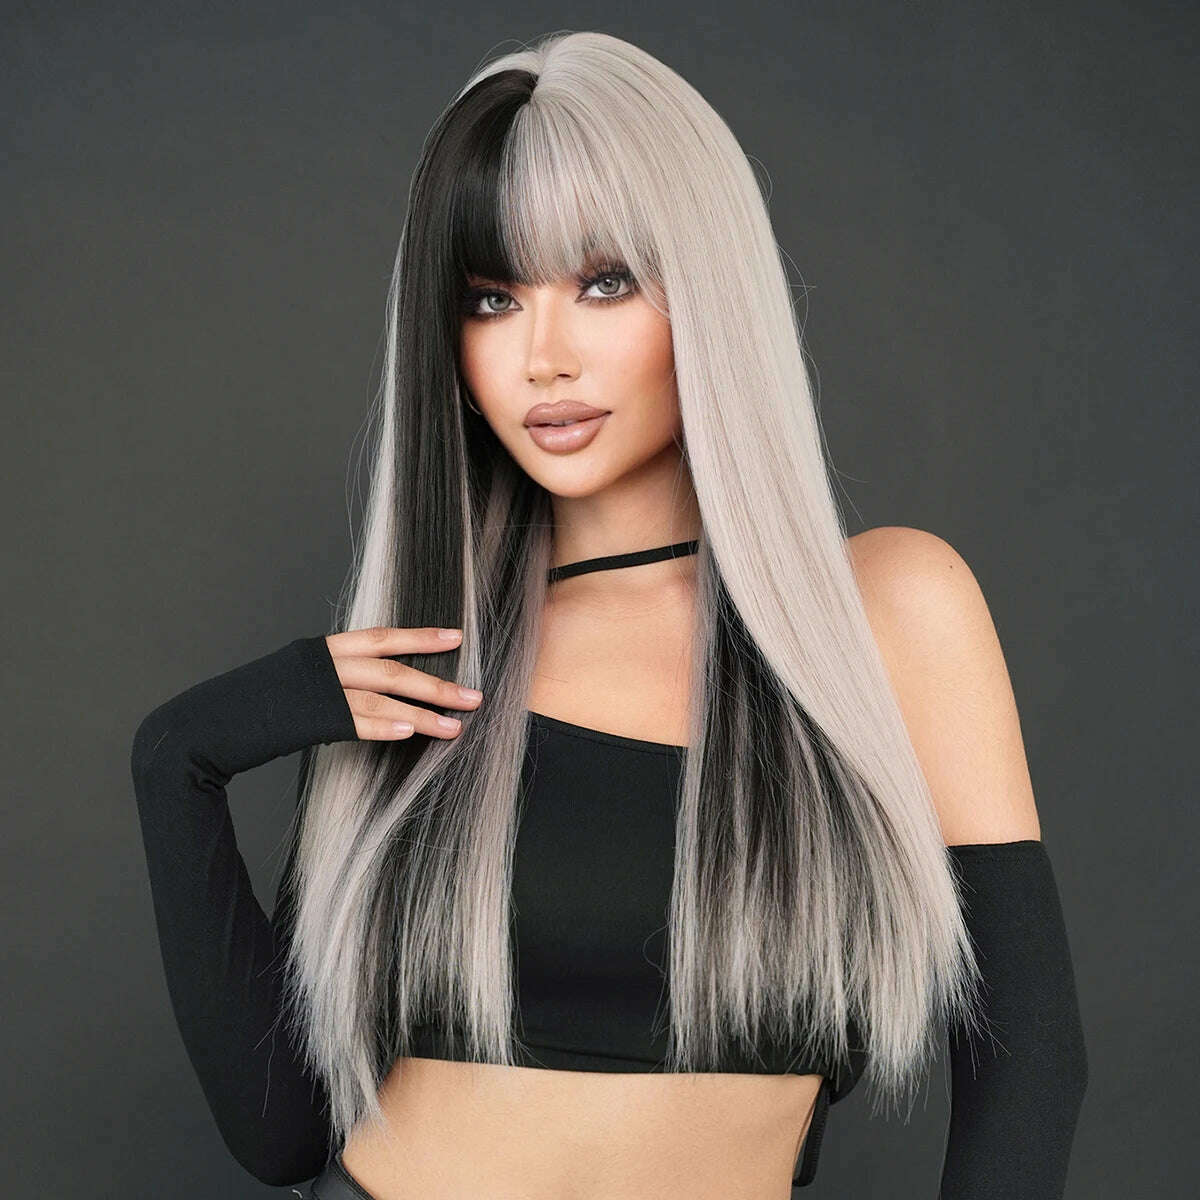 KIMLUD, NAMM Long Body Straight Silver Ash Hair Wig With Bangs For Women Daily Party High Density Hair Ombre Wigs Heat Resistant Fiber, KIMLUD Womens Clothes